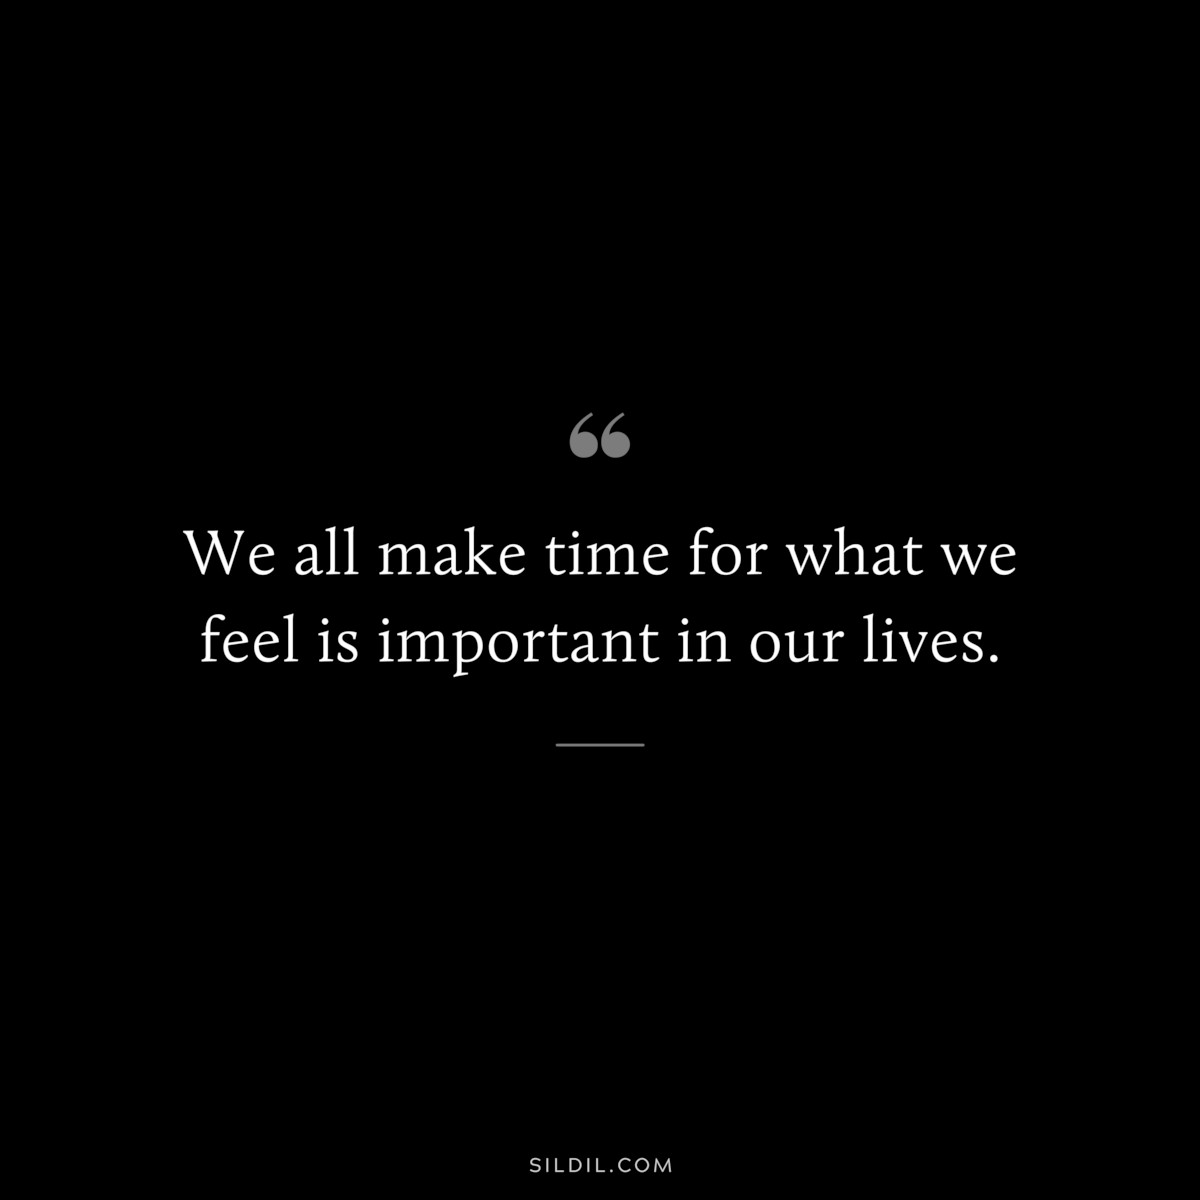 We all make time for what we feel is important in our lives.